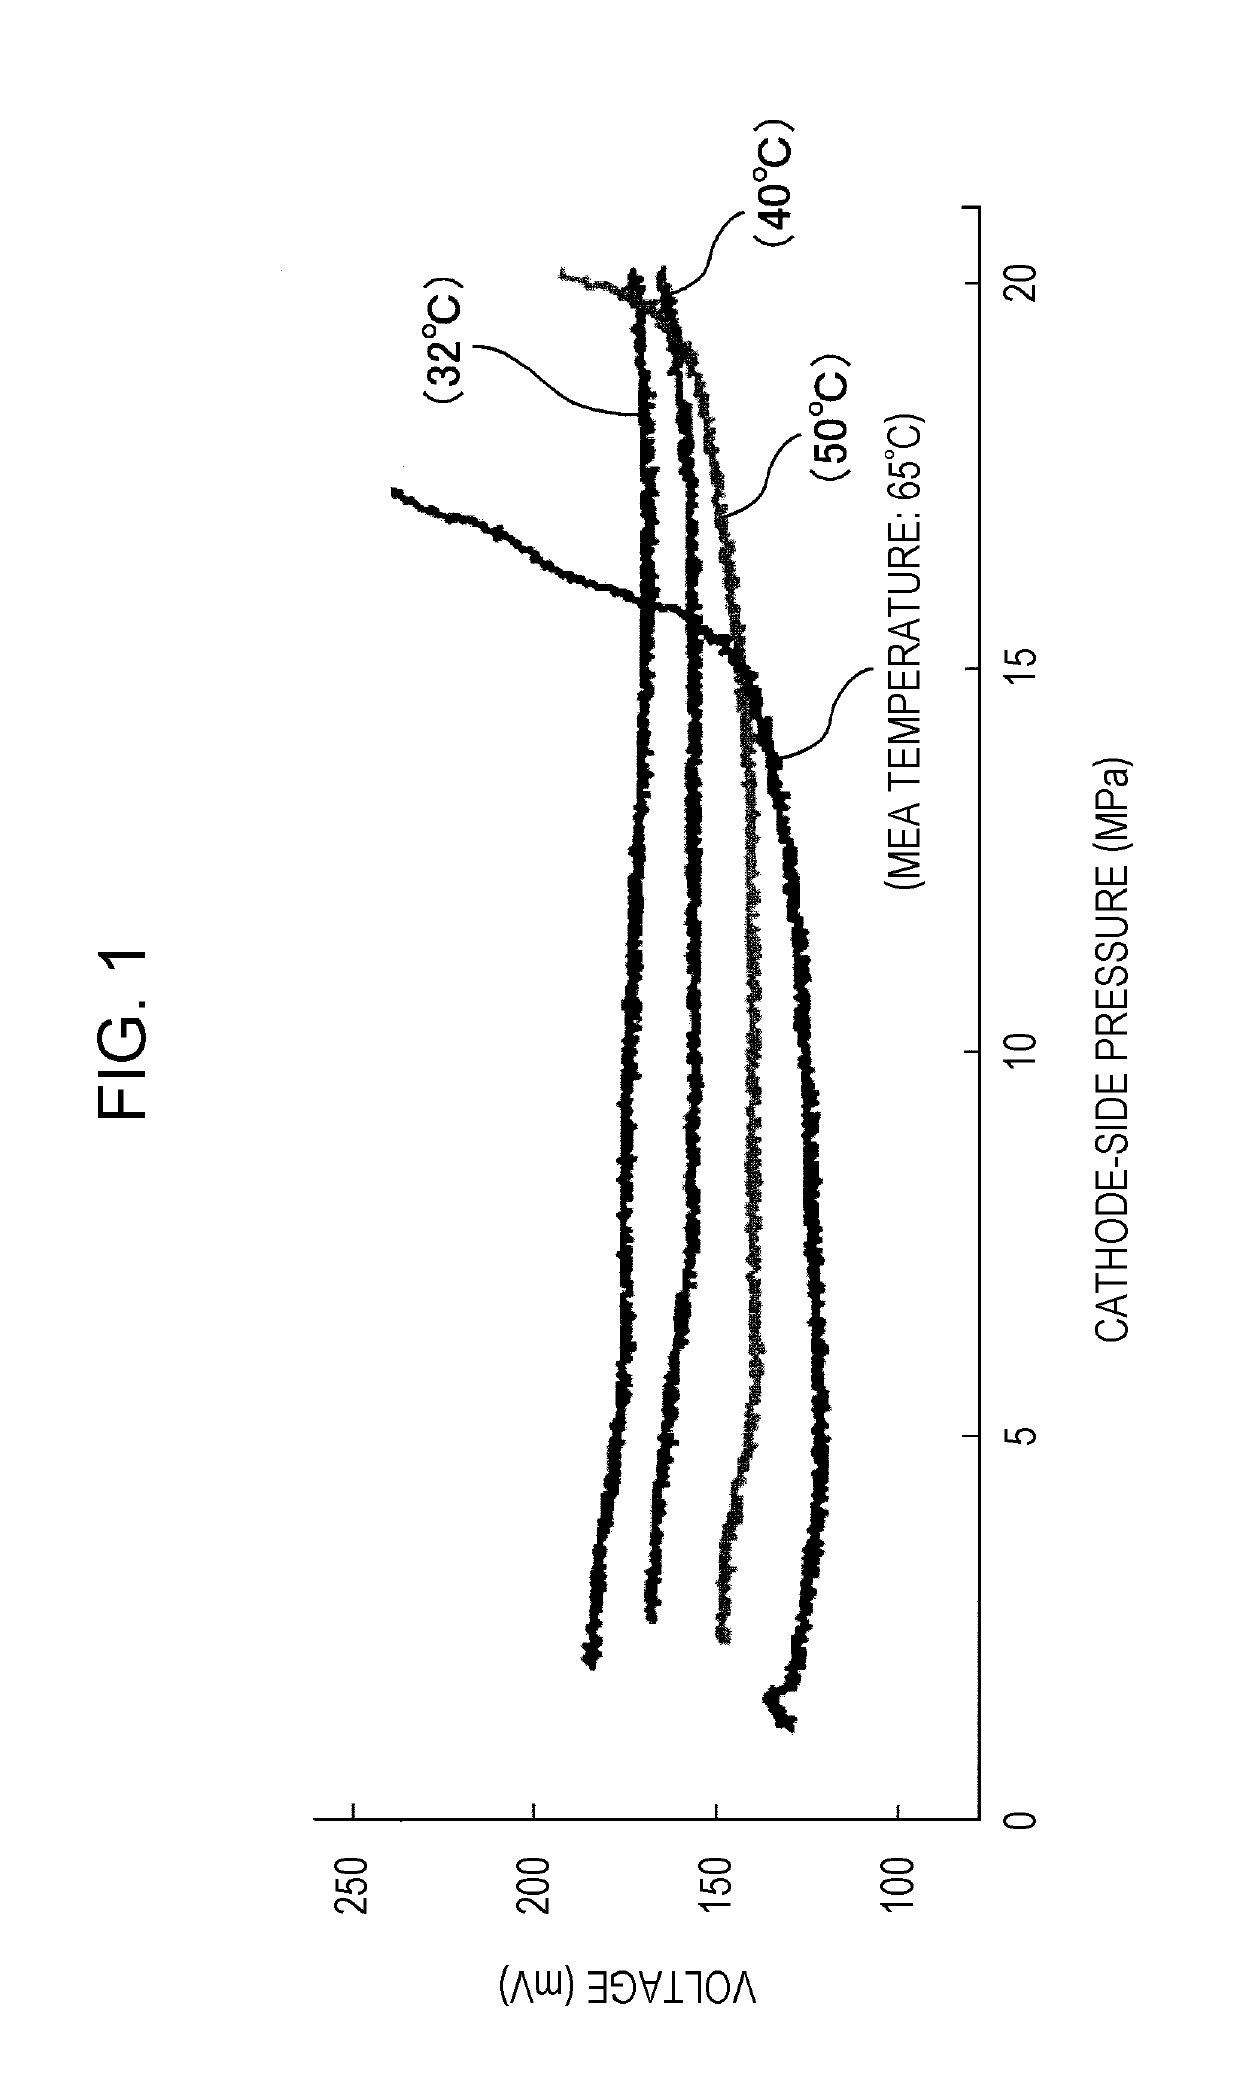 Electrochemical hydrogen pump and method for operating electrochemical hydrogen pump